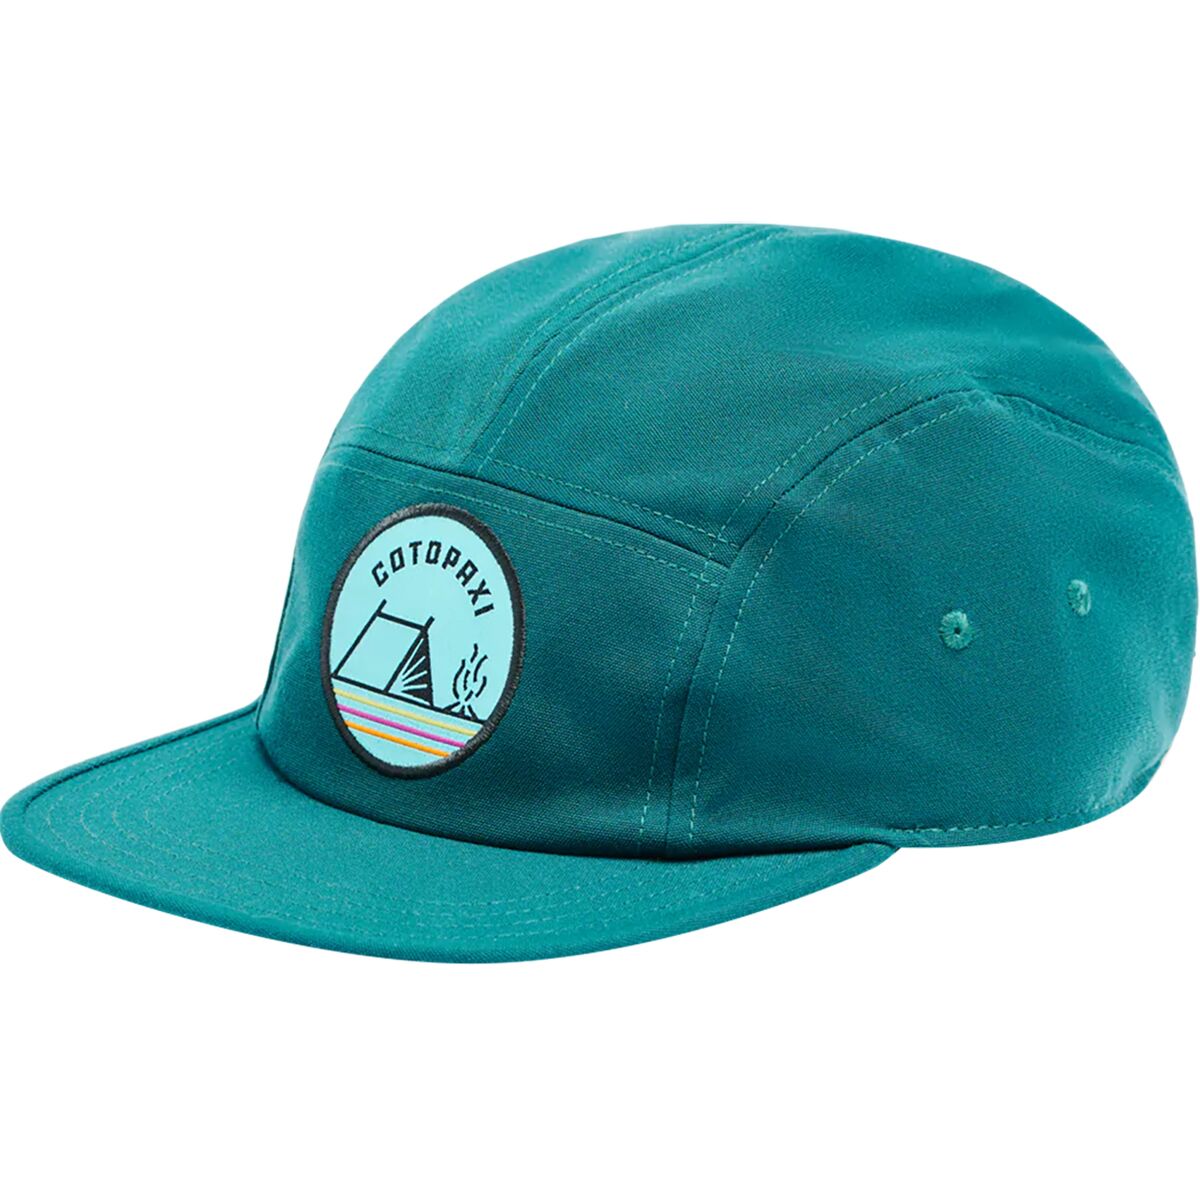 Cotopaxi Camp Life 5-Panel Hat